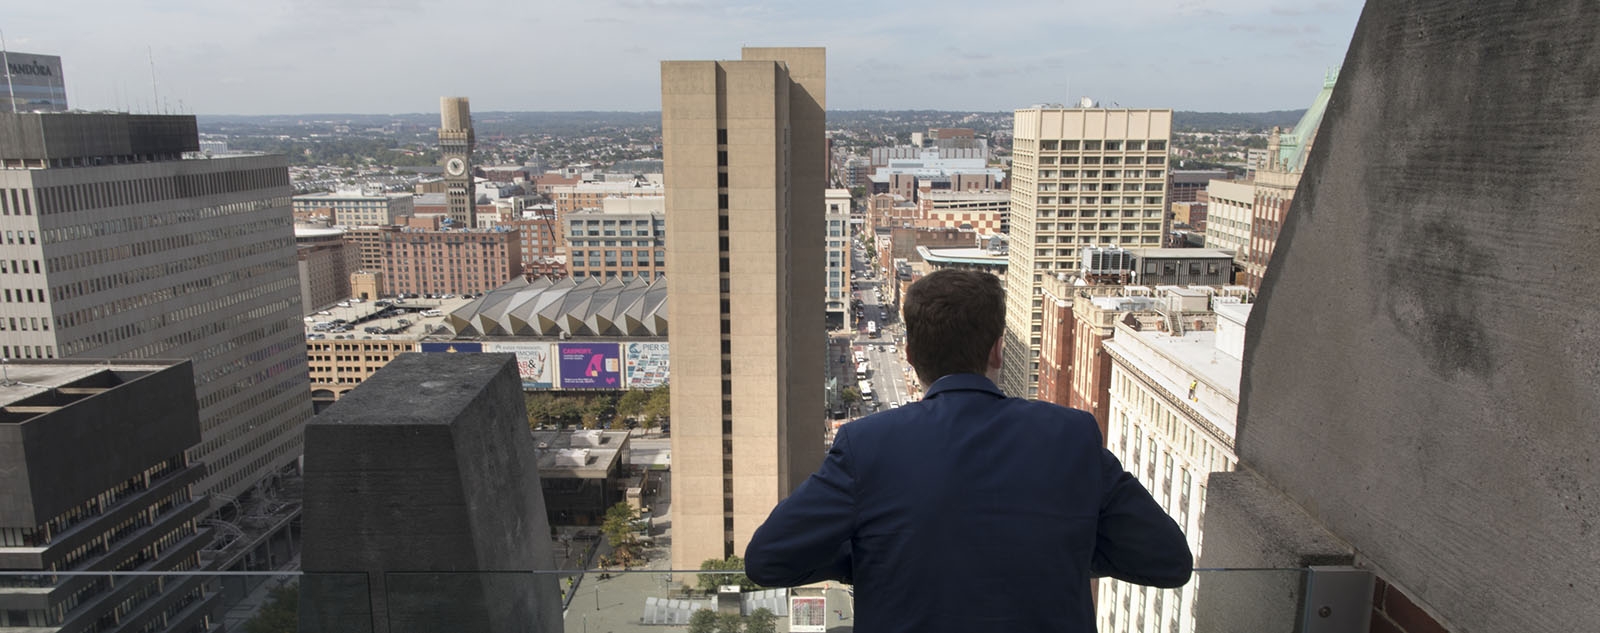 Bill King looking out from a balcony over the city of Baltimore